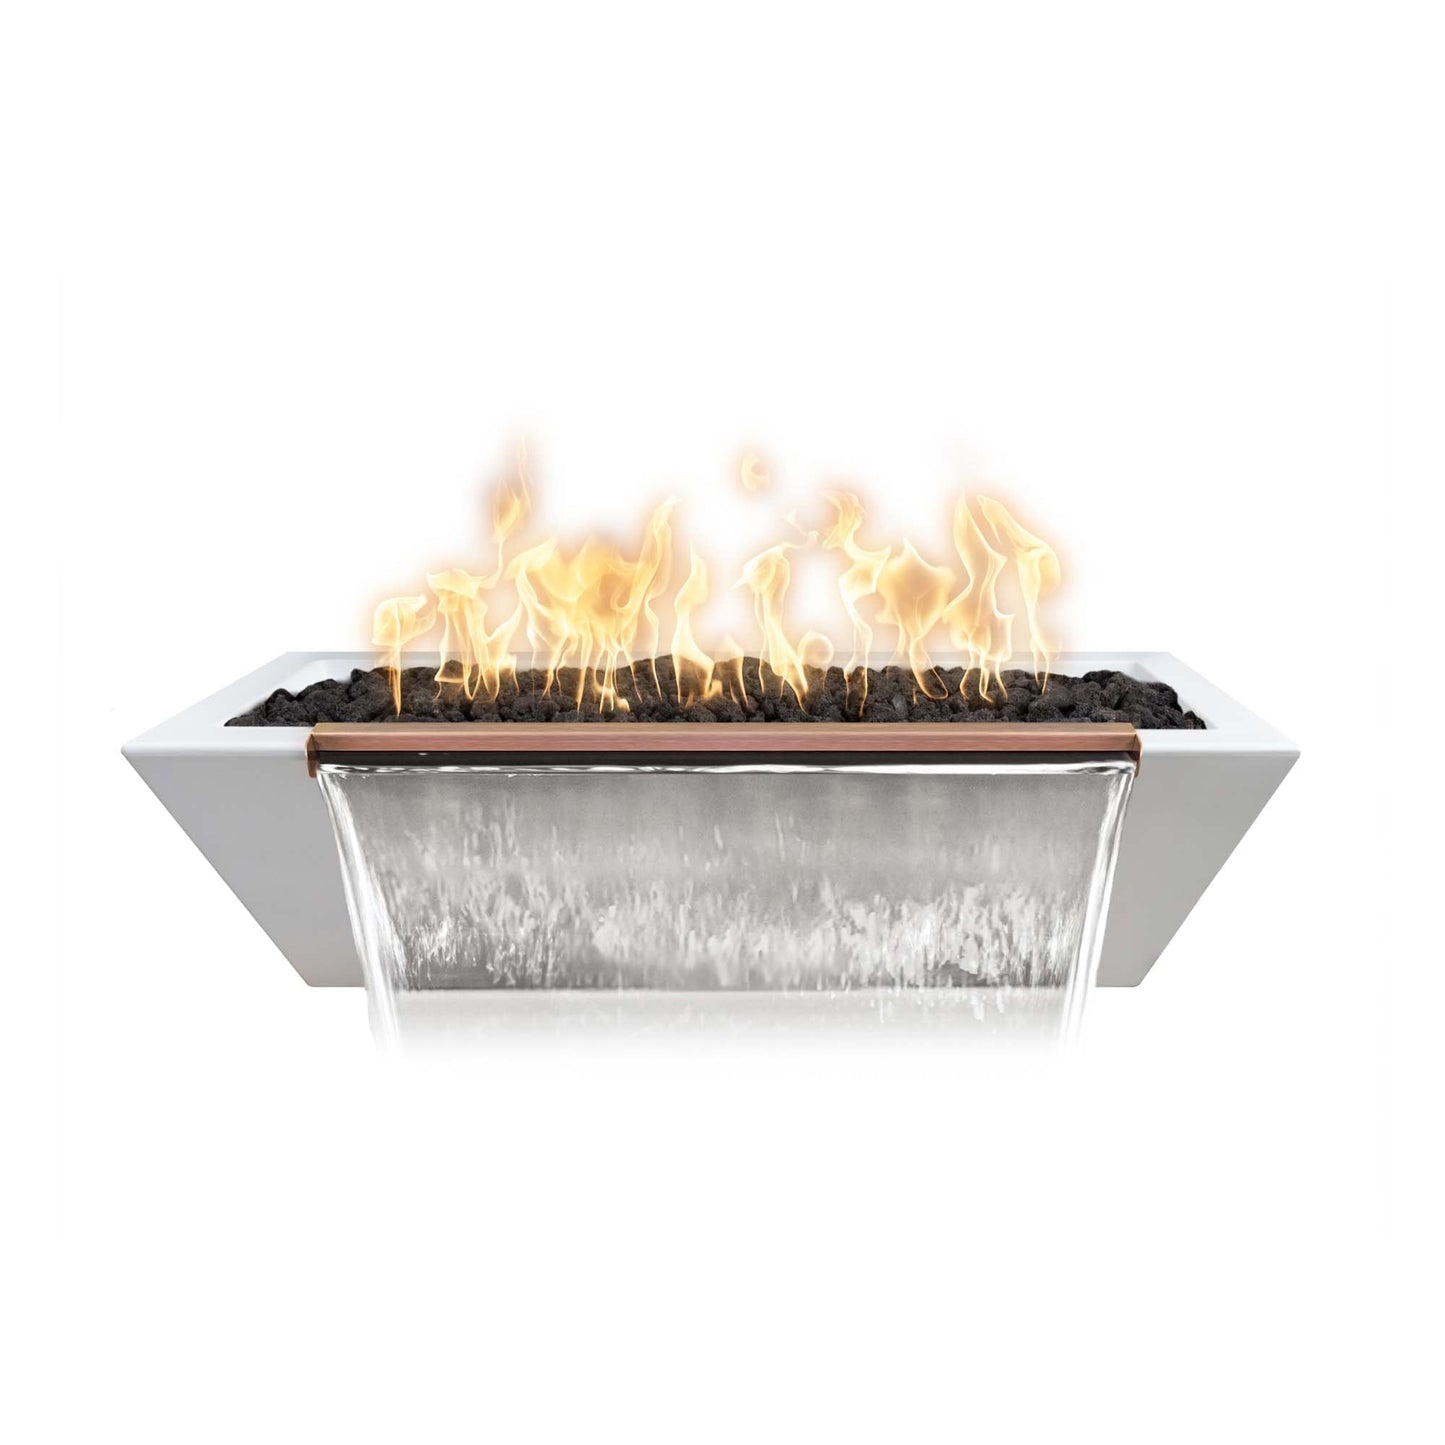 The Outdoor Plus Linear Maya 60" Ash GFRC Concrete Natural Gas Fire & Water Bowl with Match Lit Ignition